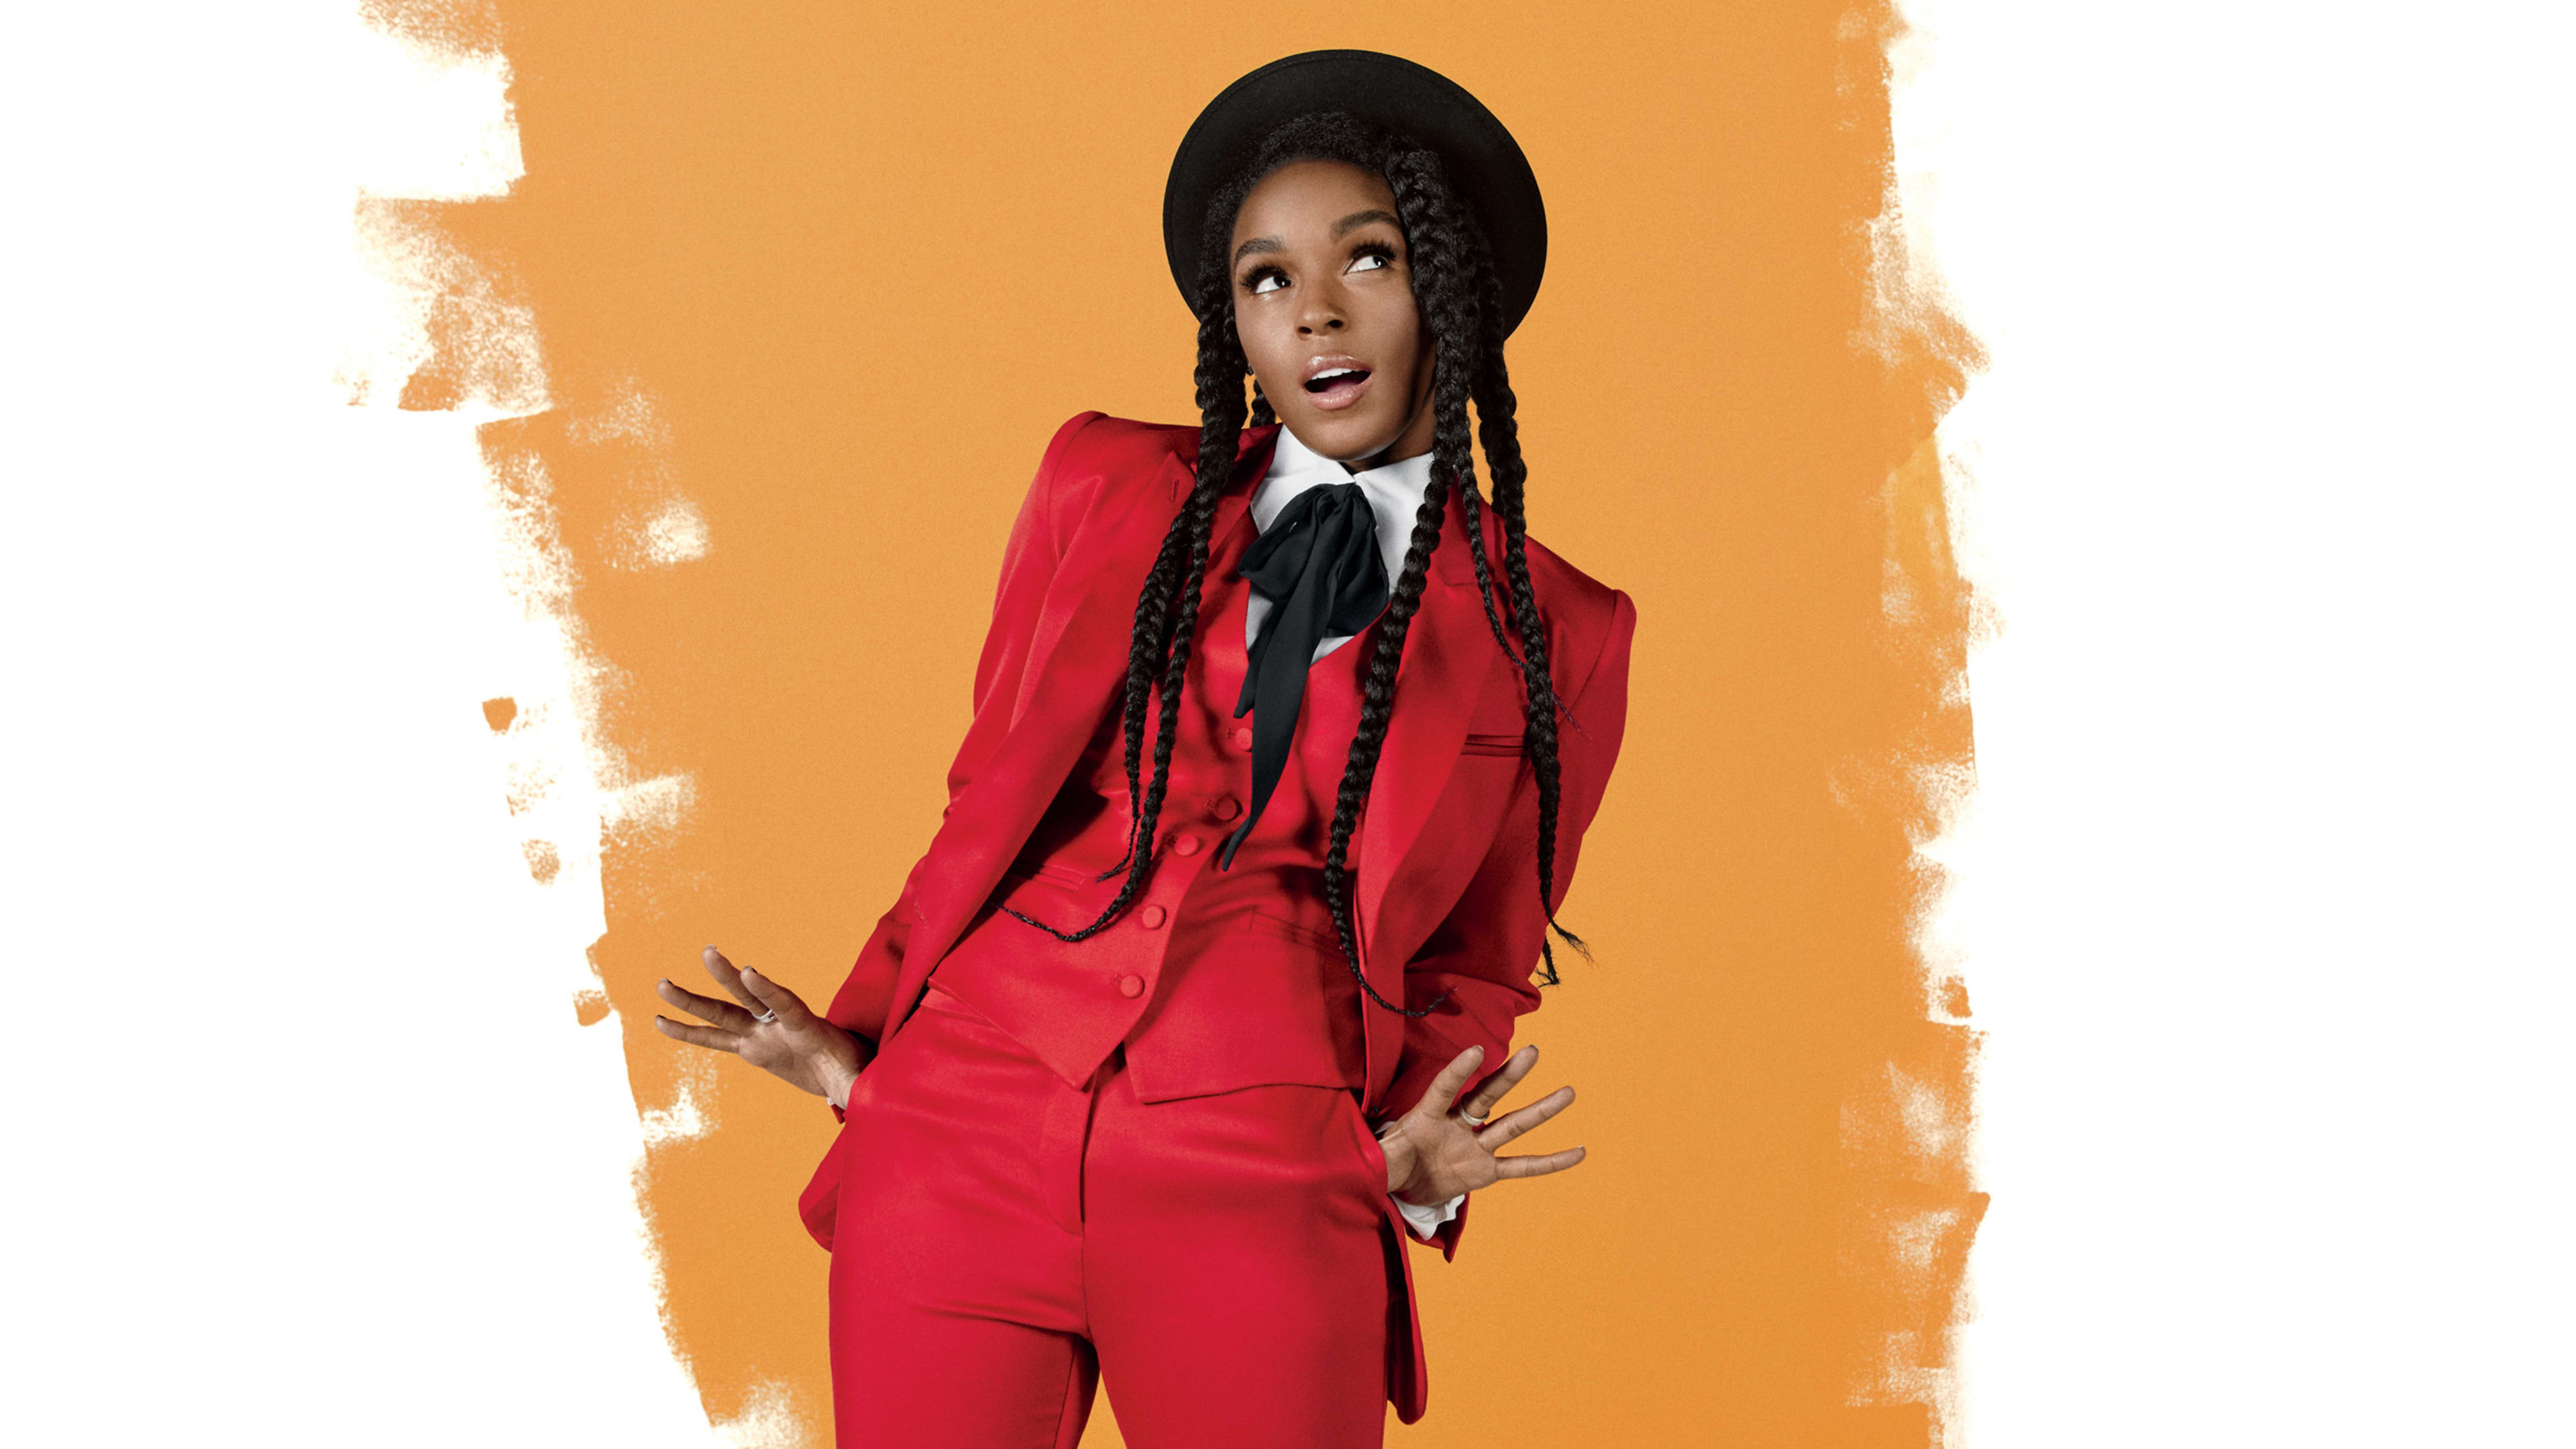 How singer-songwriter, actress-activist Janelle Monáe gets so much done